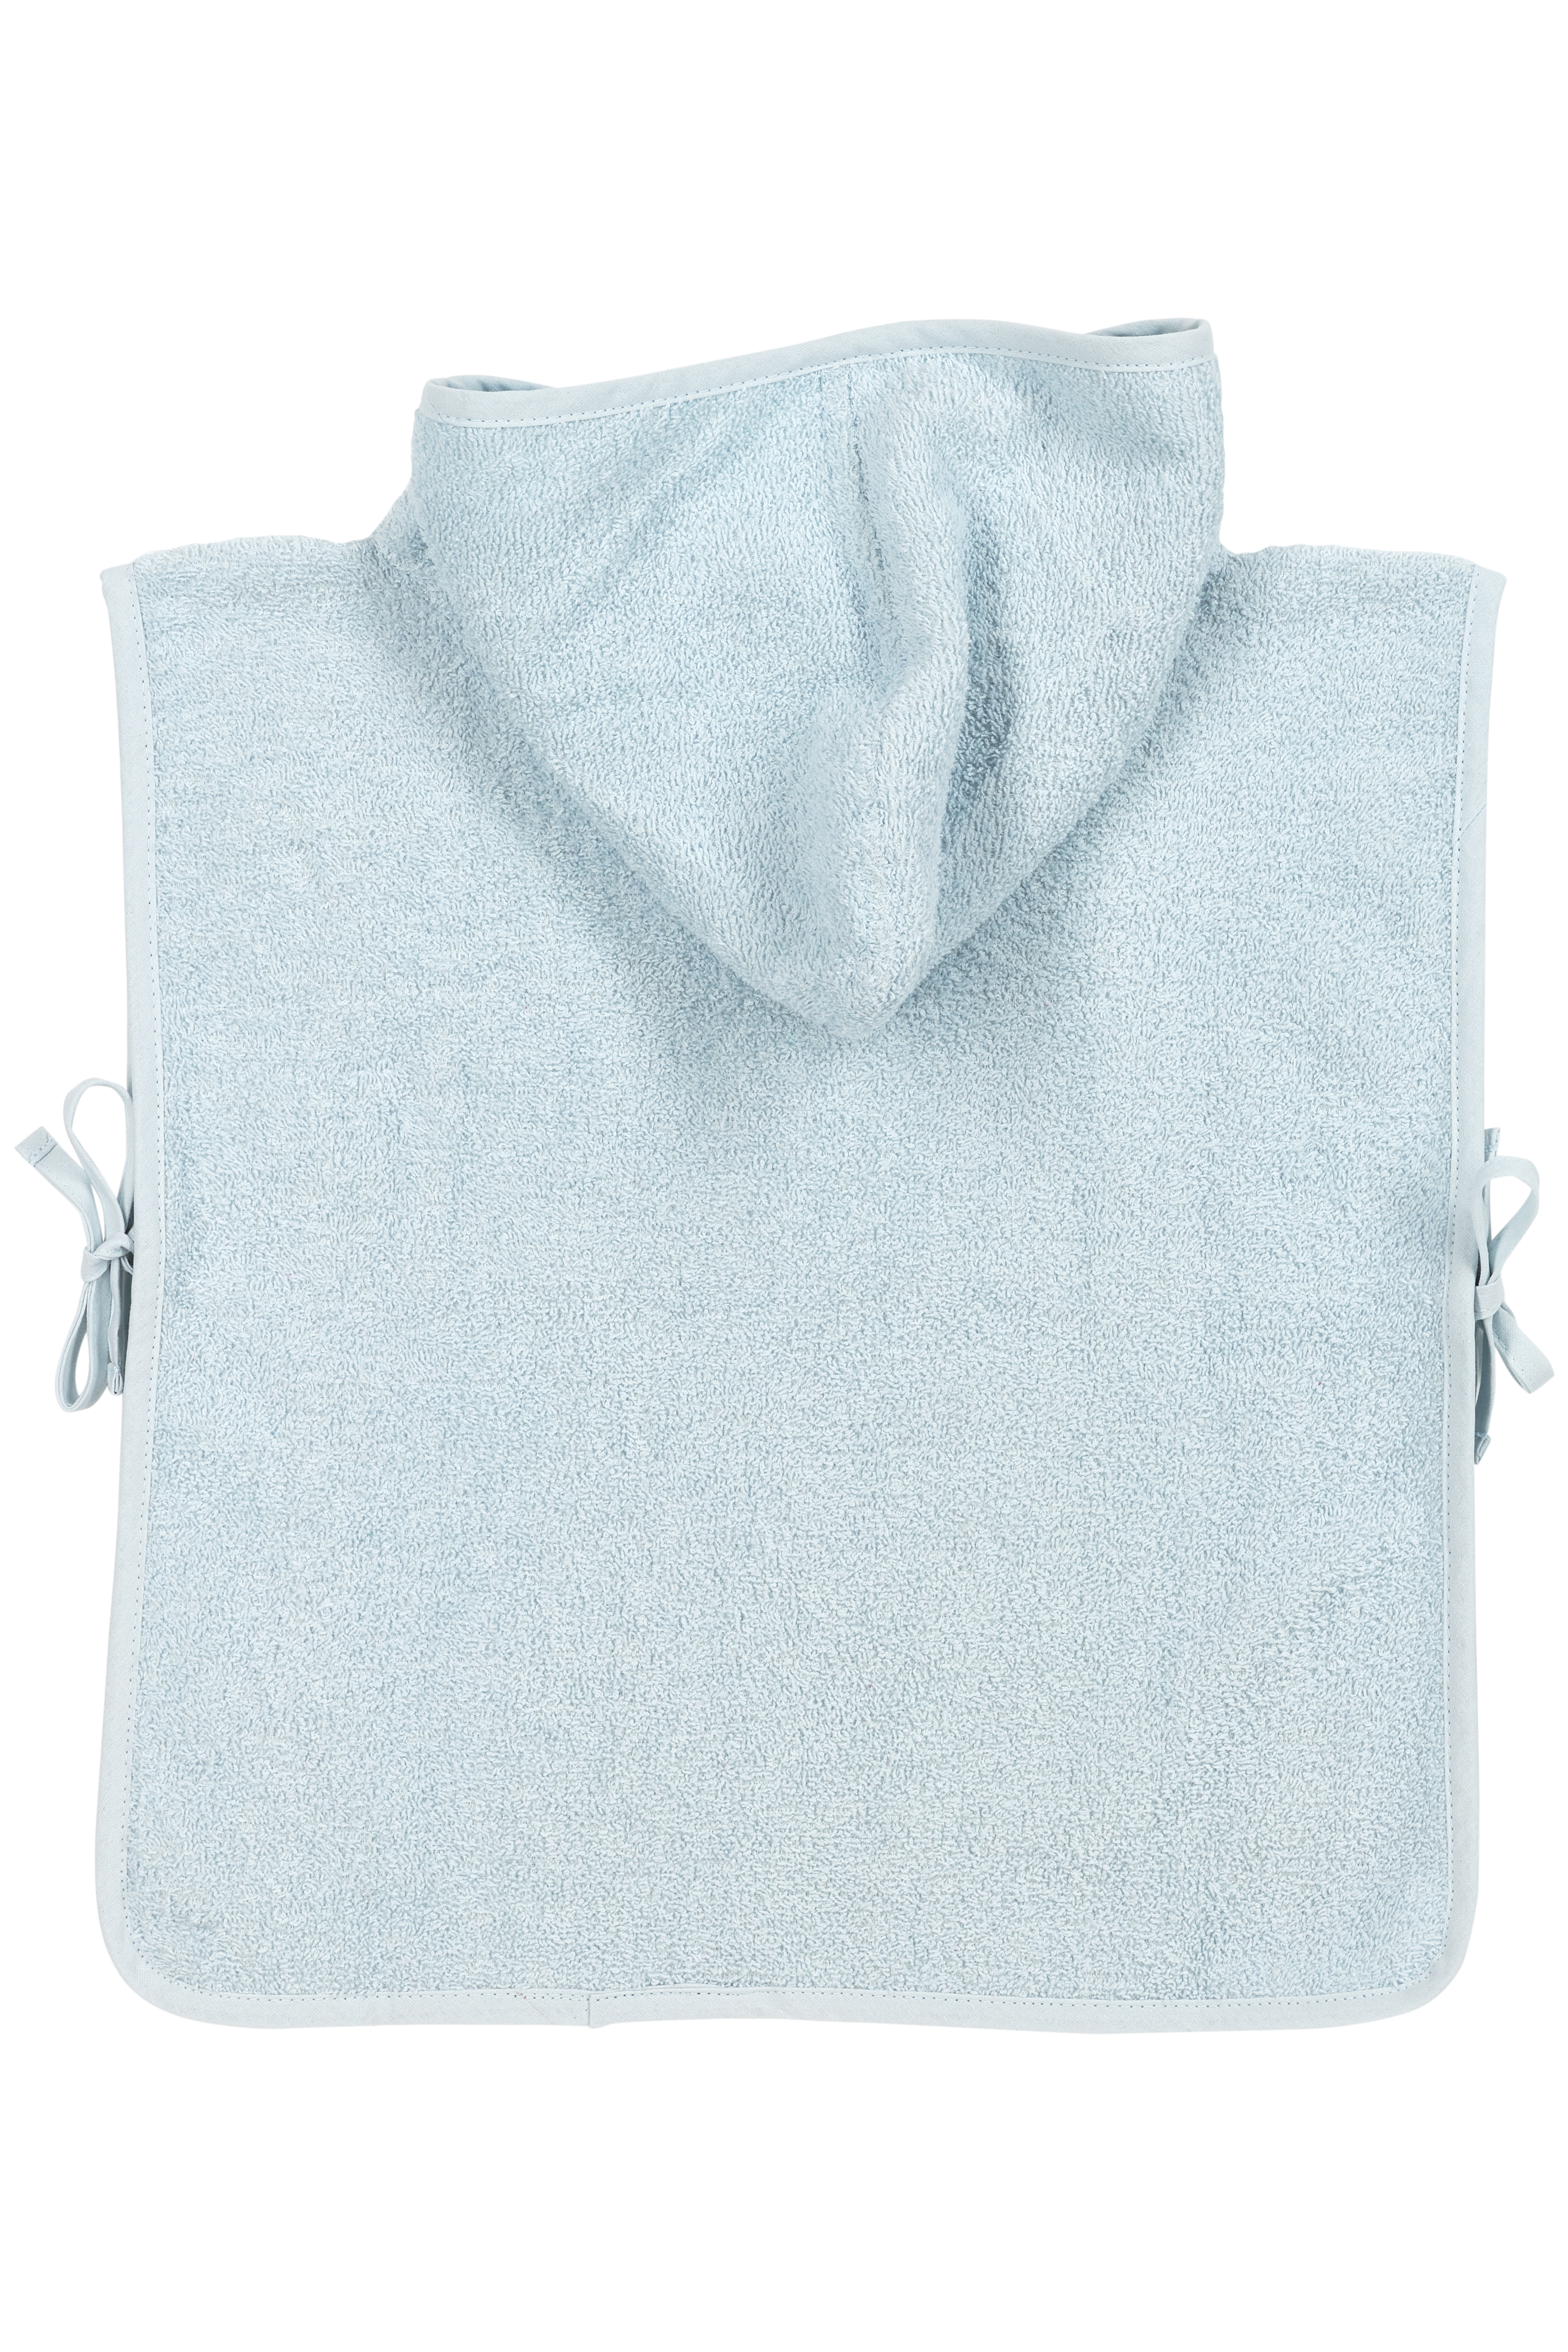 Badeponcho frottee Uni - light blue - 1-3 Jahre